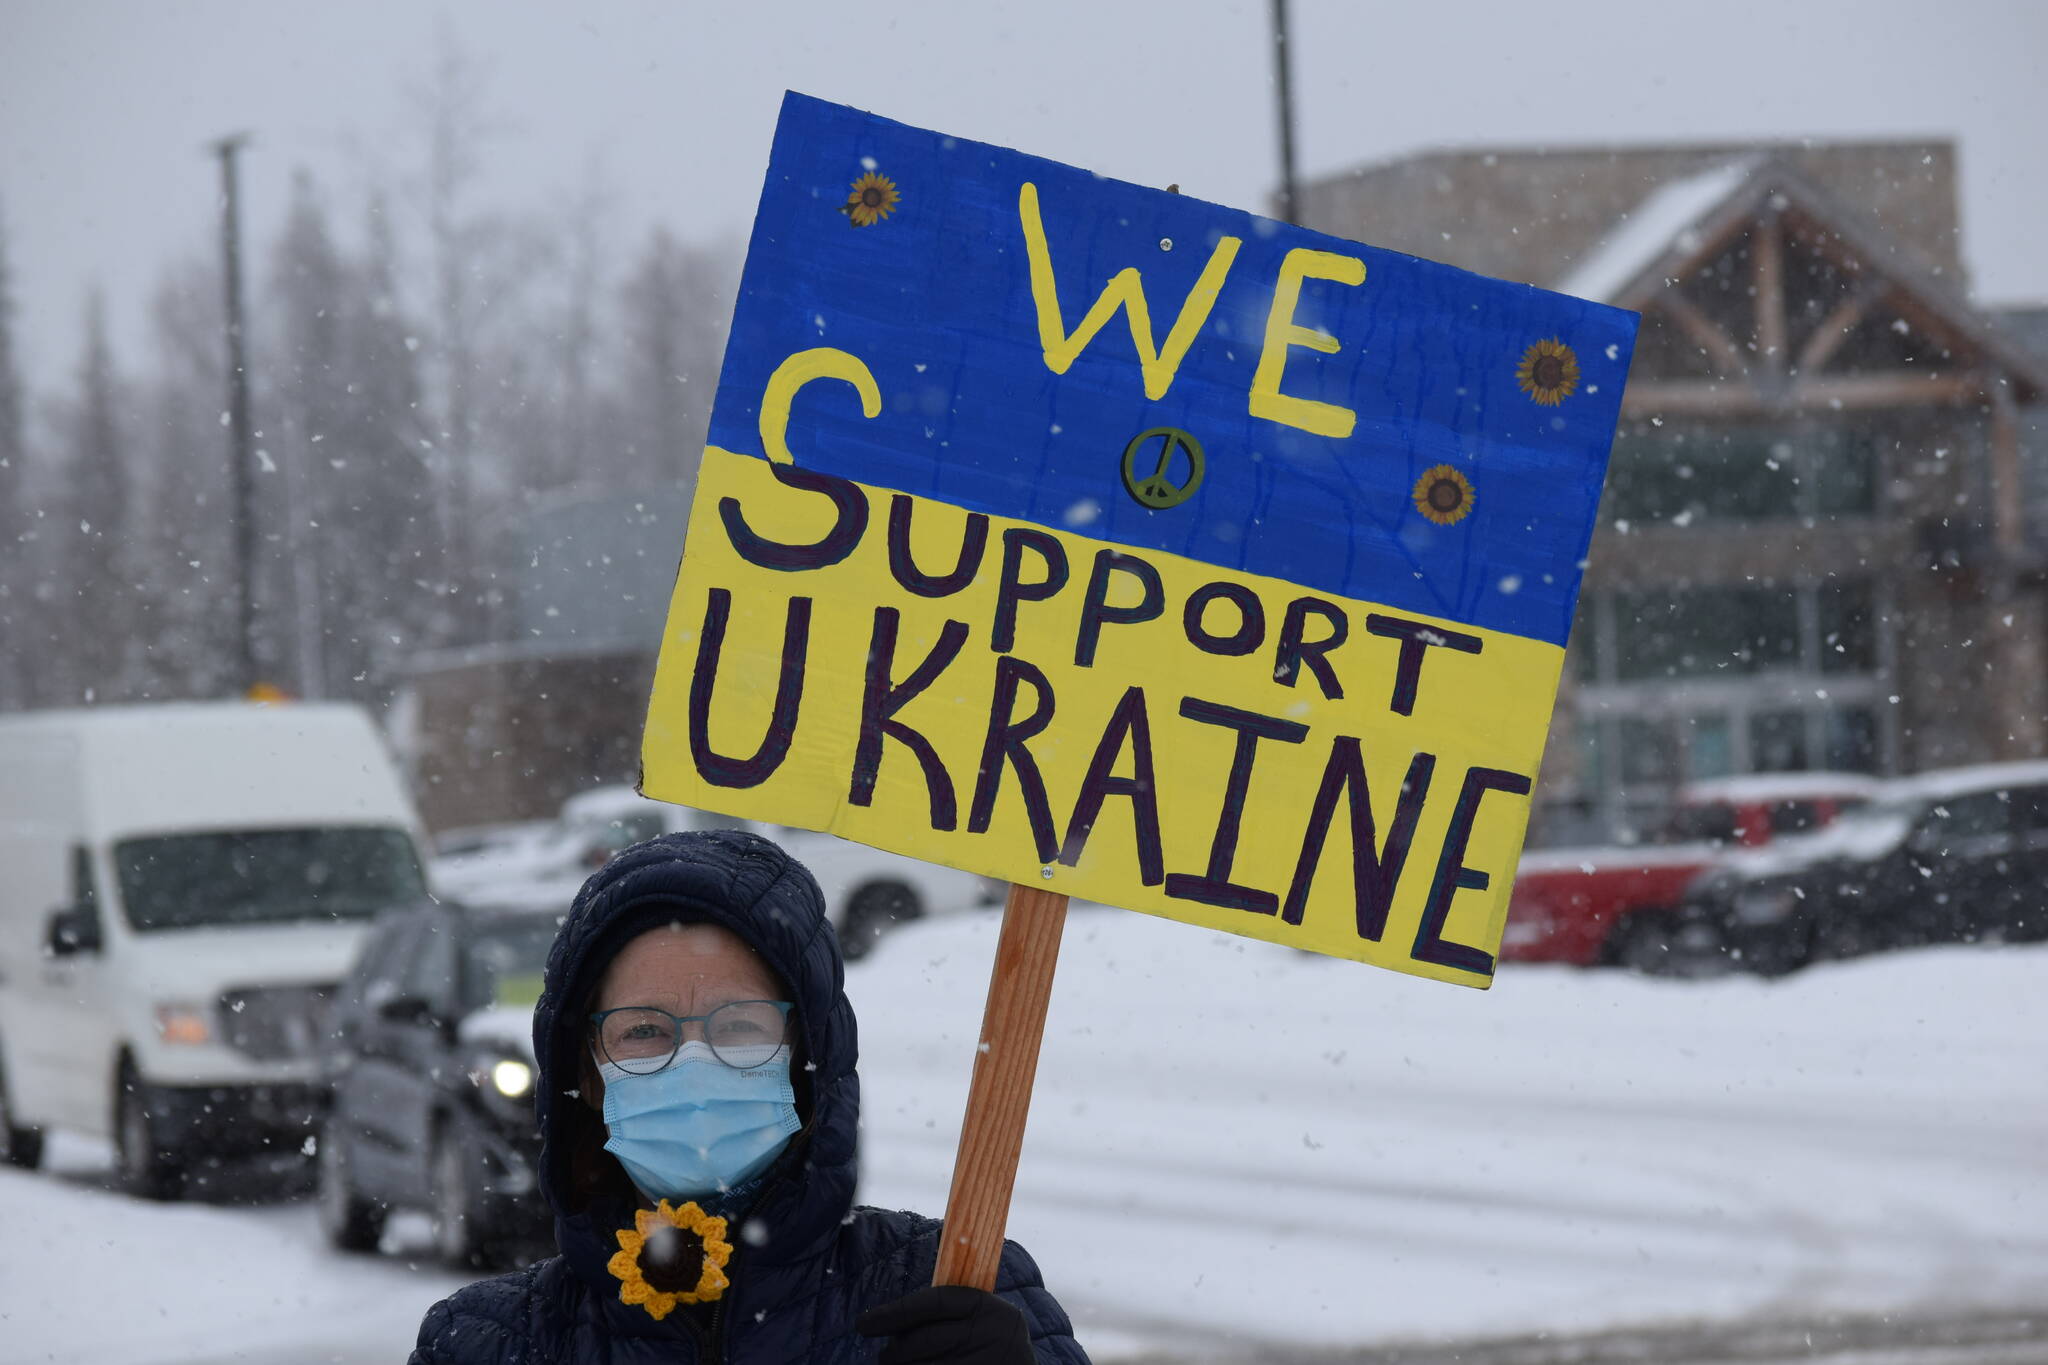 Michele Vasquez demonstrates during the Many Voices Ukraine vigil on Saturday, March 5, 2022, in Soldotna, Alaska. (Camille Botello/Peninsula Clarion)